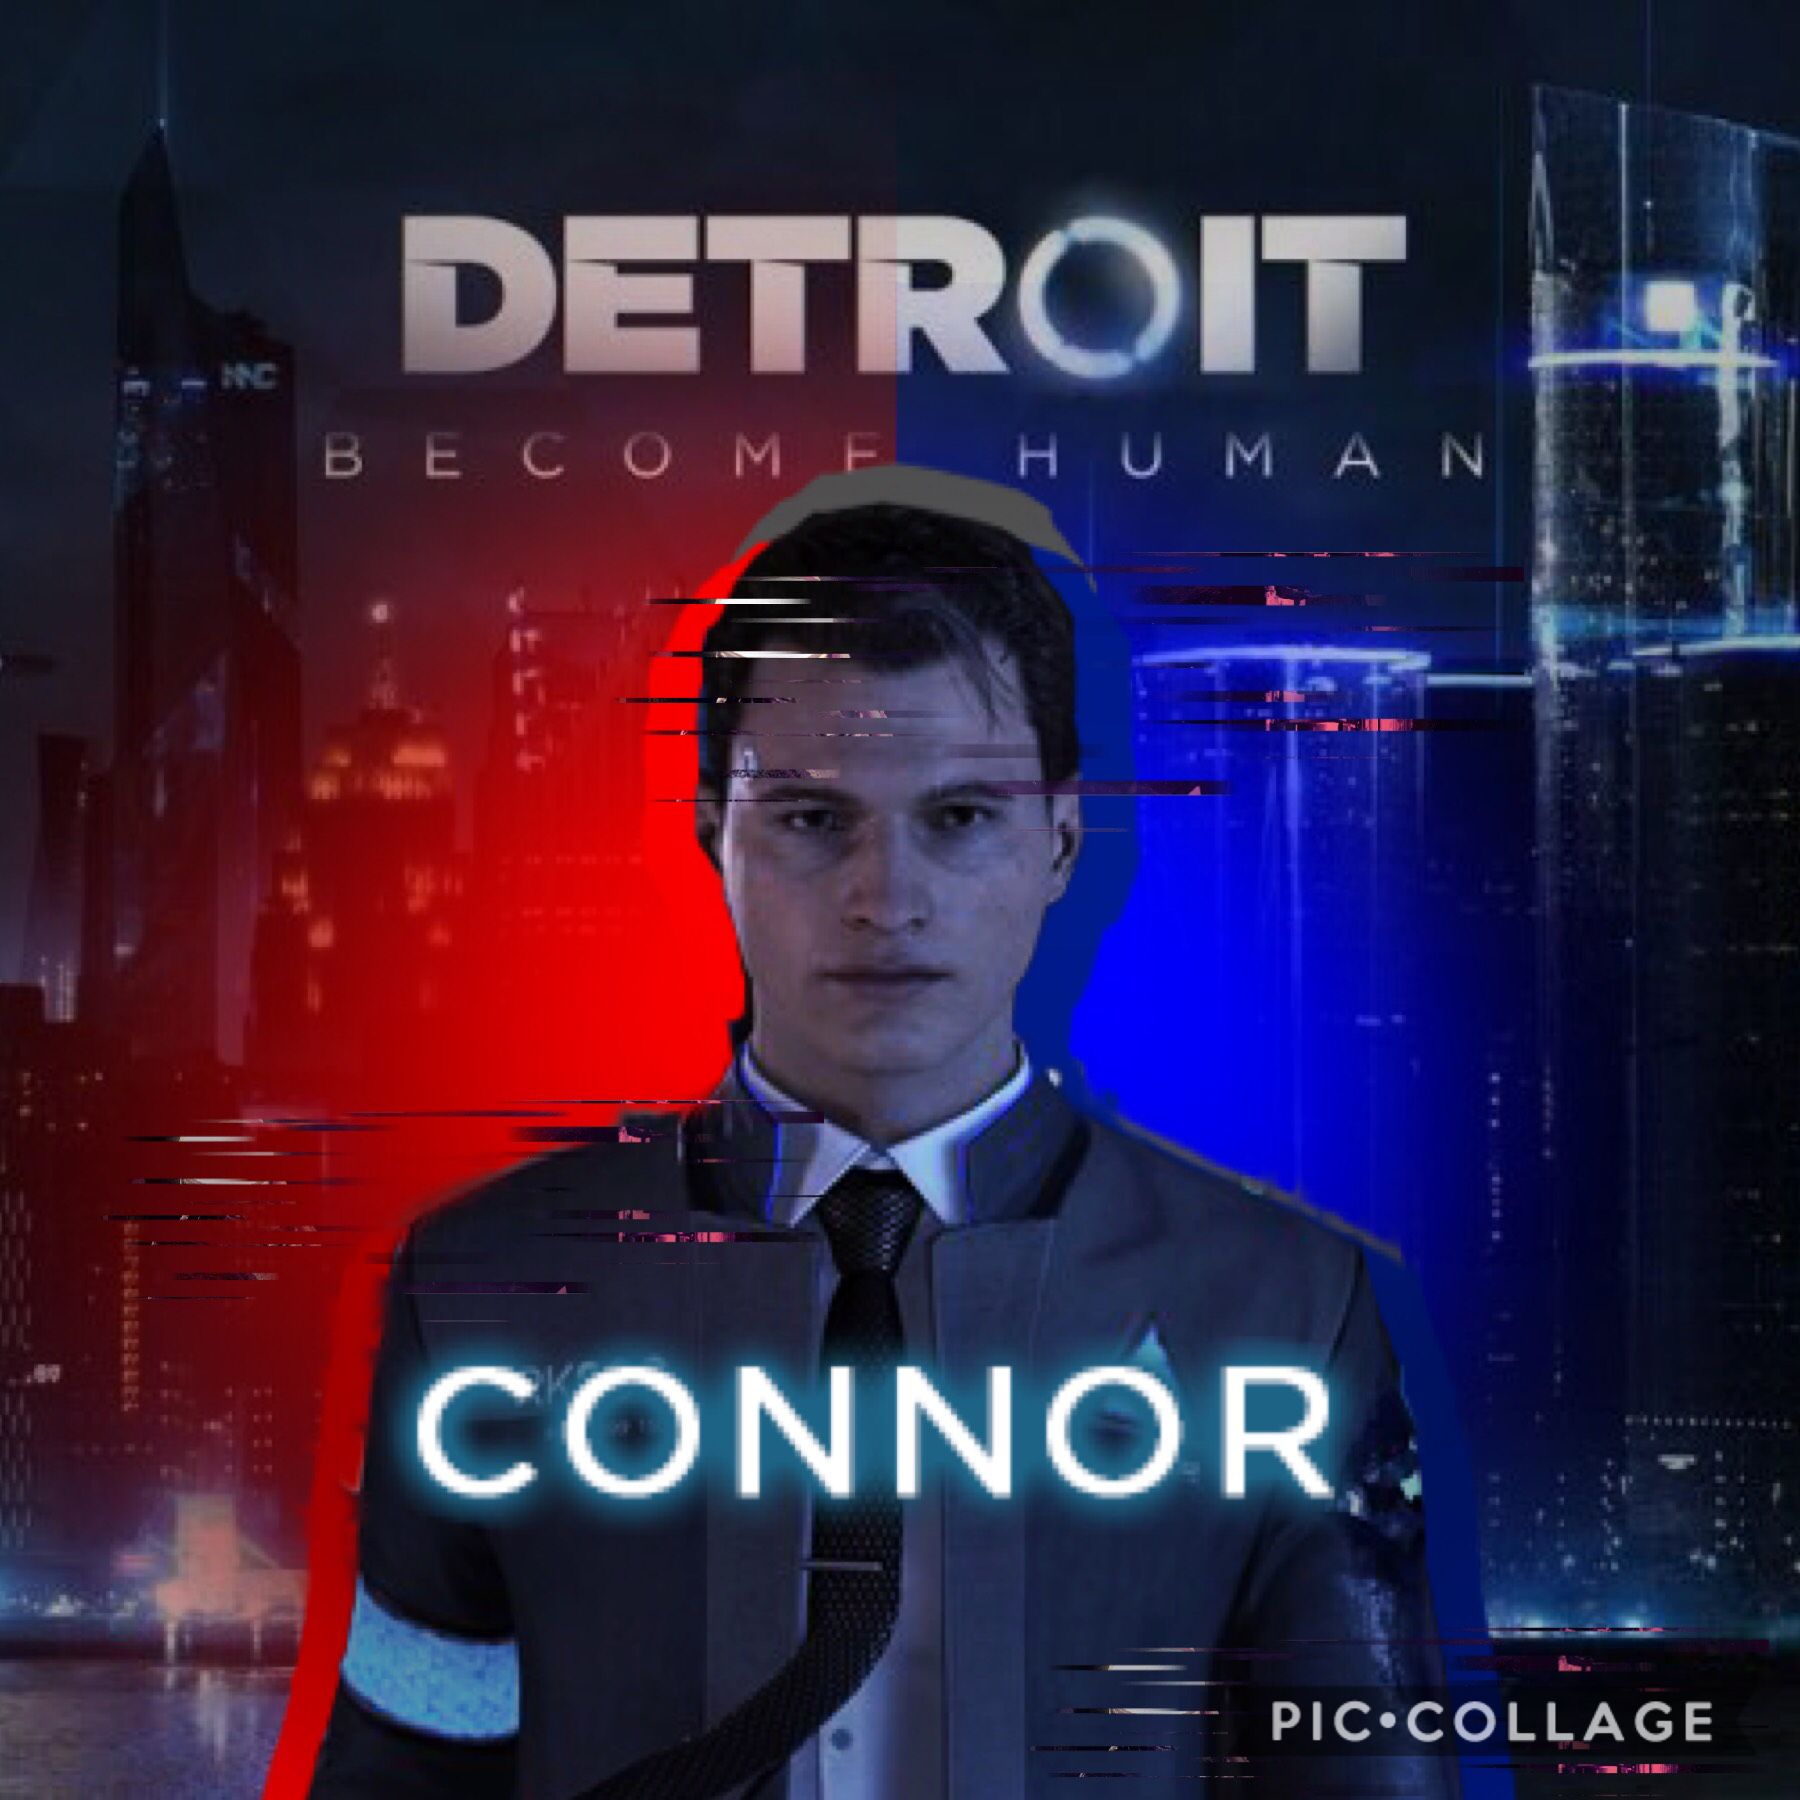 Hi I'm Connor. I'm the android sent by Cyberlife.